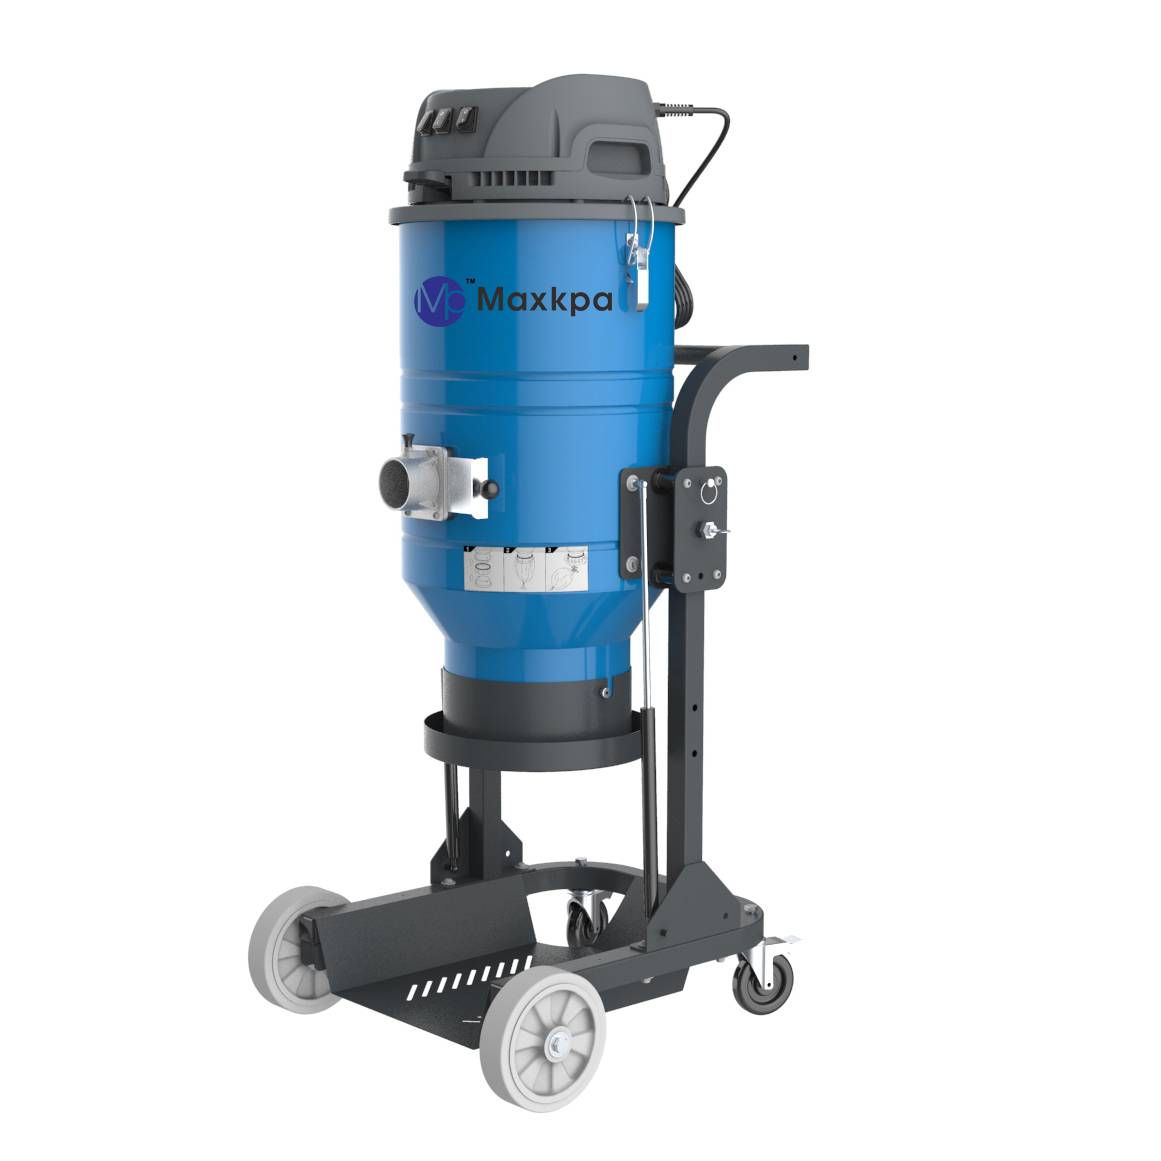 new TS3000 Single phase HEPA dust extractor Featured Image